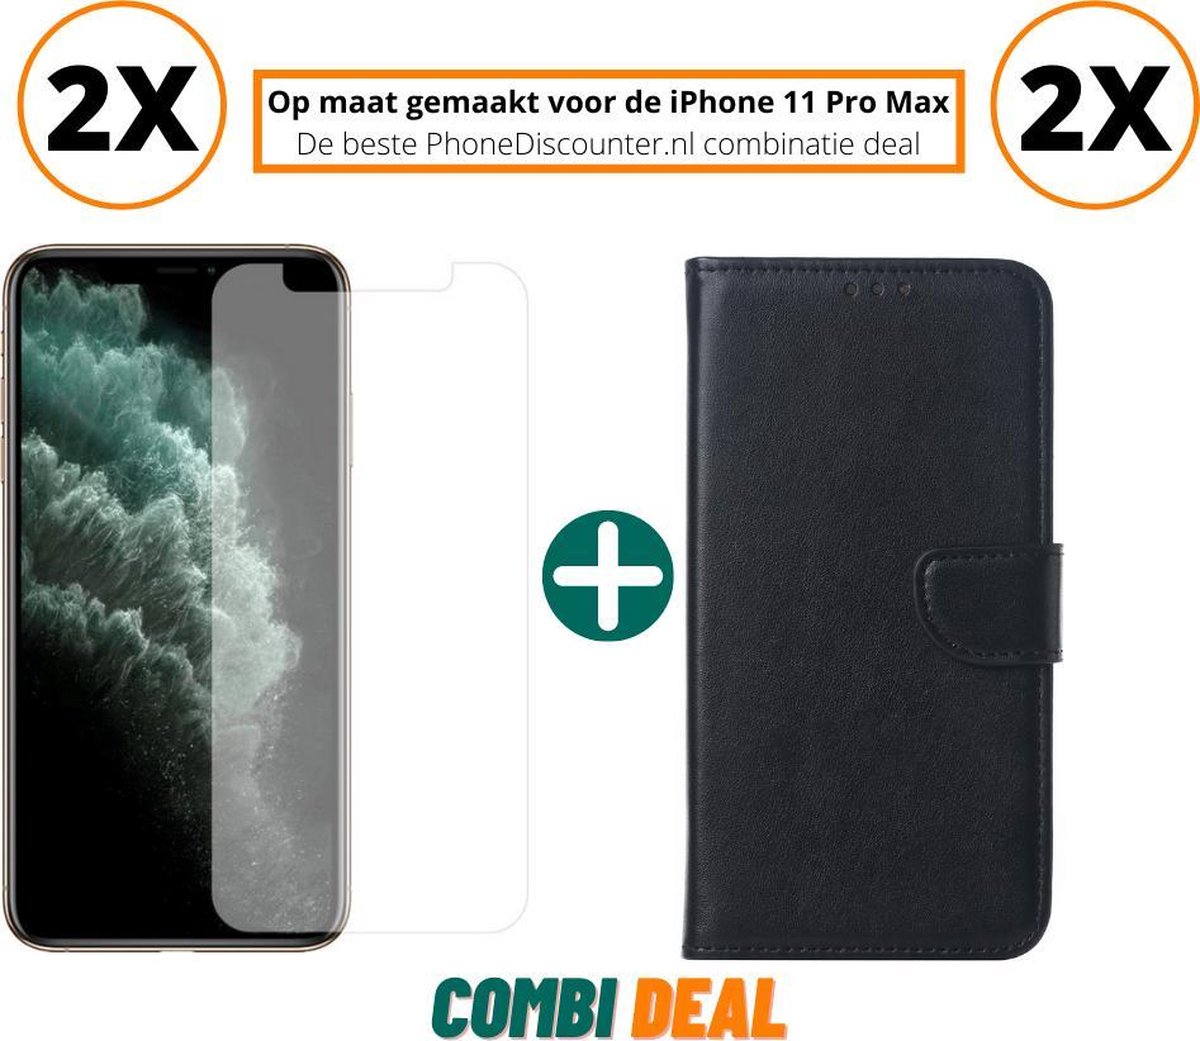 iphone 11 pro max cover case | iPhone 11 Pro Max A2161 full body cover 2x | iPhone 11 Pro Max stand case zwart | 2x hoes iphone 11 pro max apple | iPhone 11 Pro Max beschermhoes + 2x iPhone 11 Pro Max gehard glas screenprotector